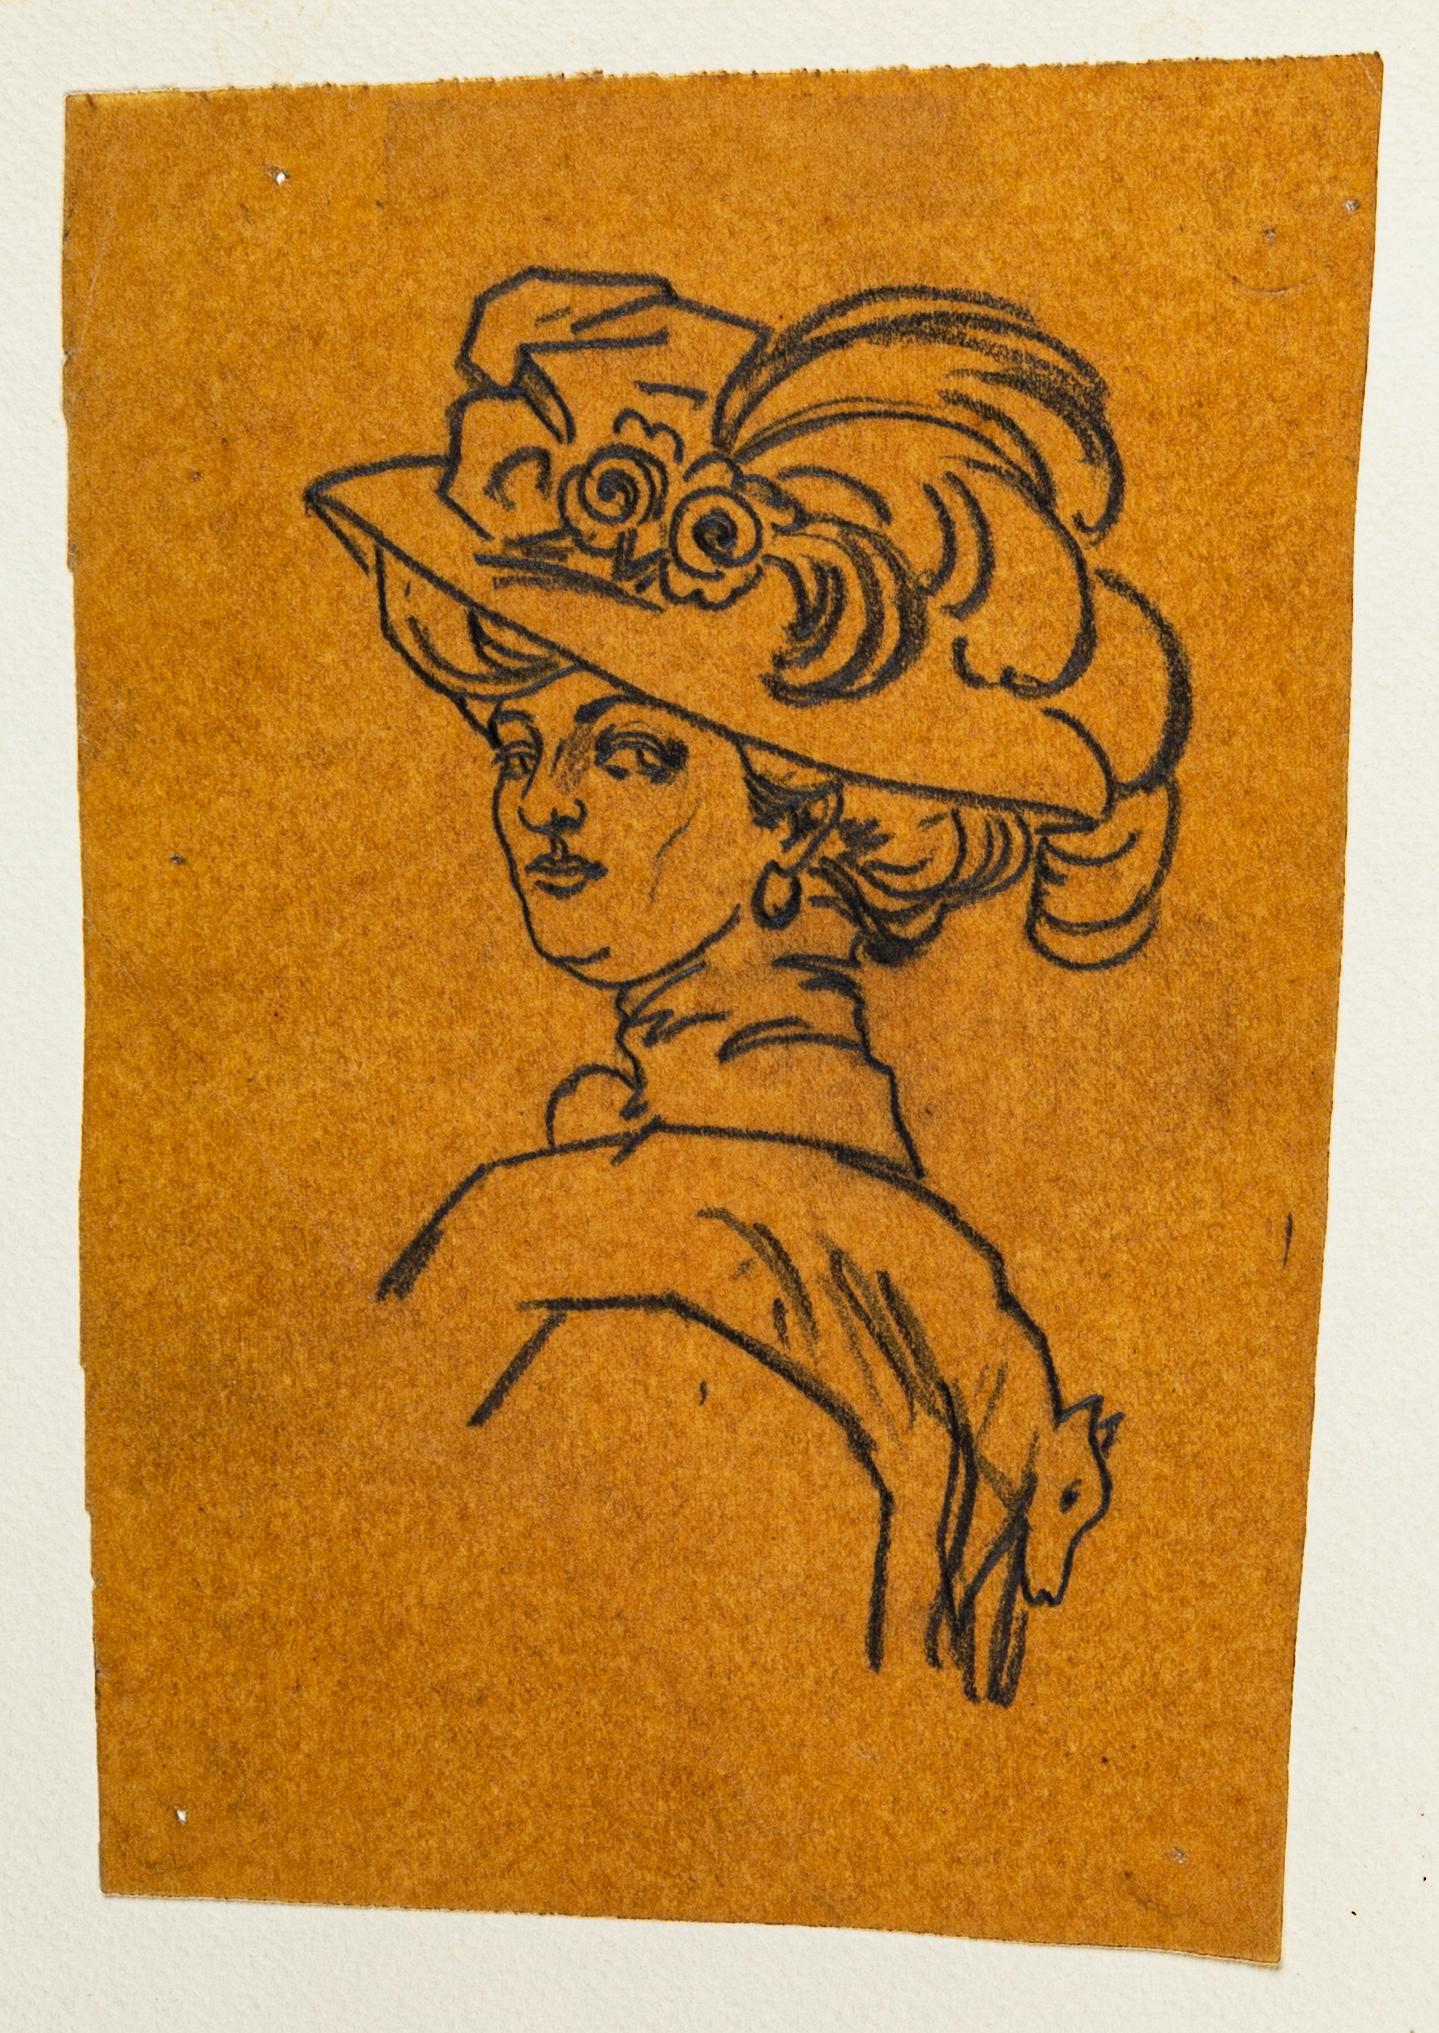 Portrait  - Original China Ink Drawing on Paper - Early 20th Century - Art by Marguerite Callet-Carcano